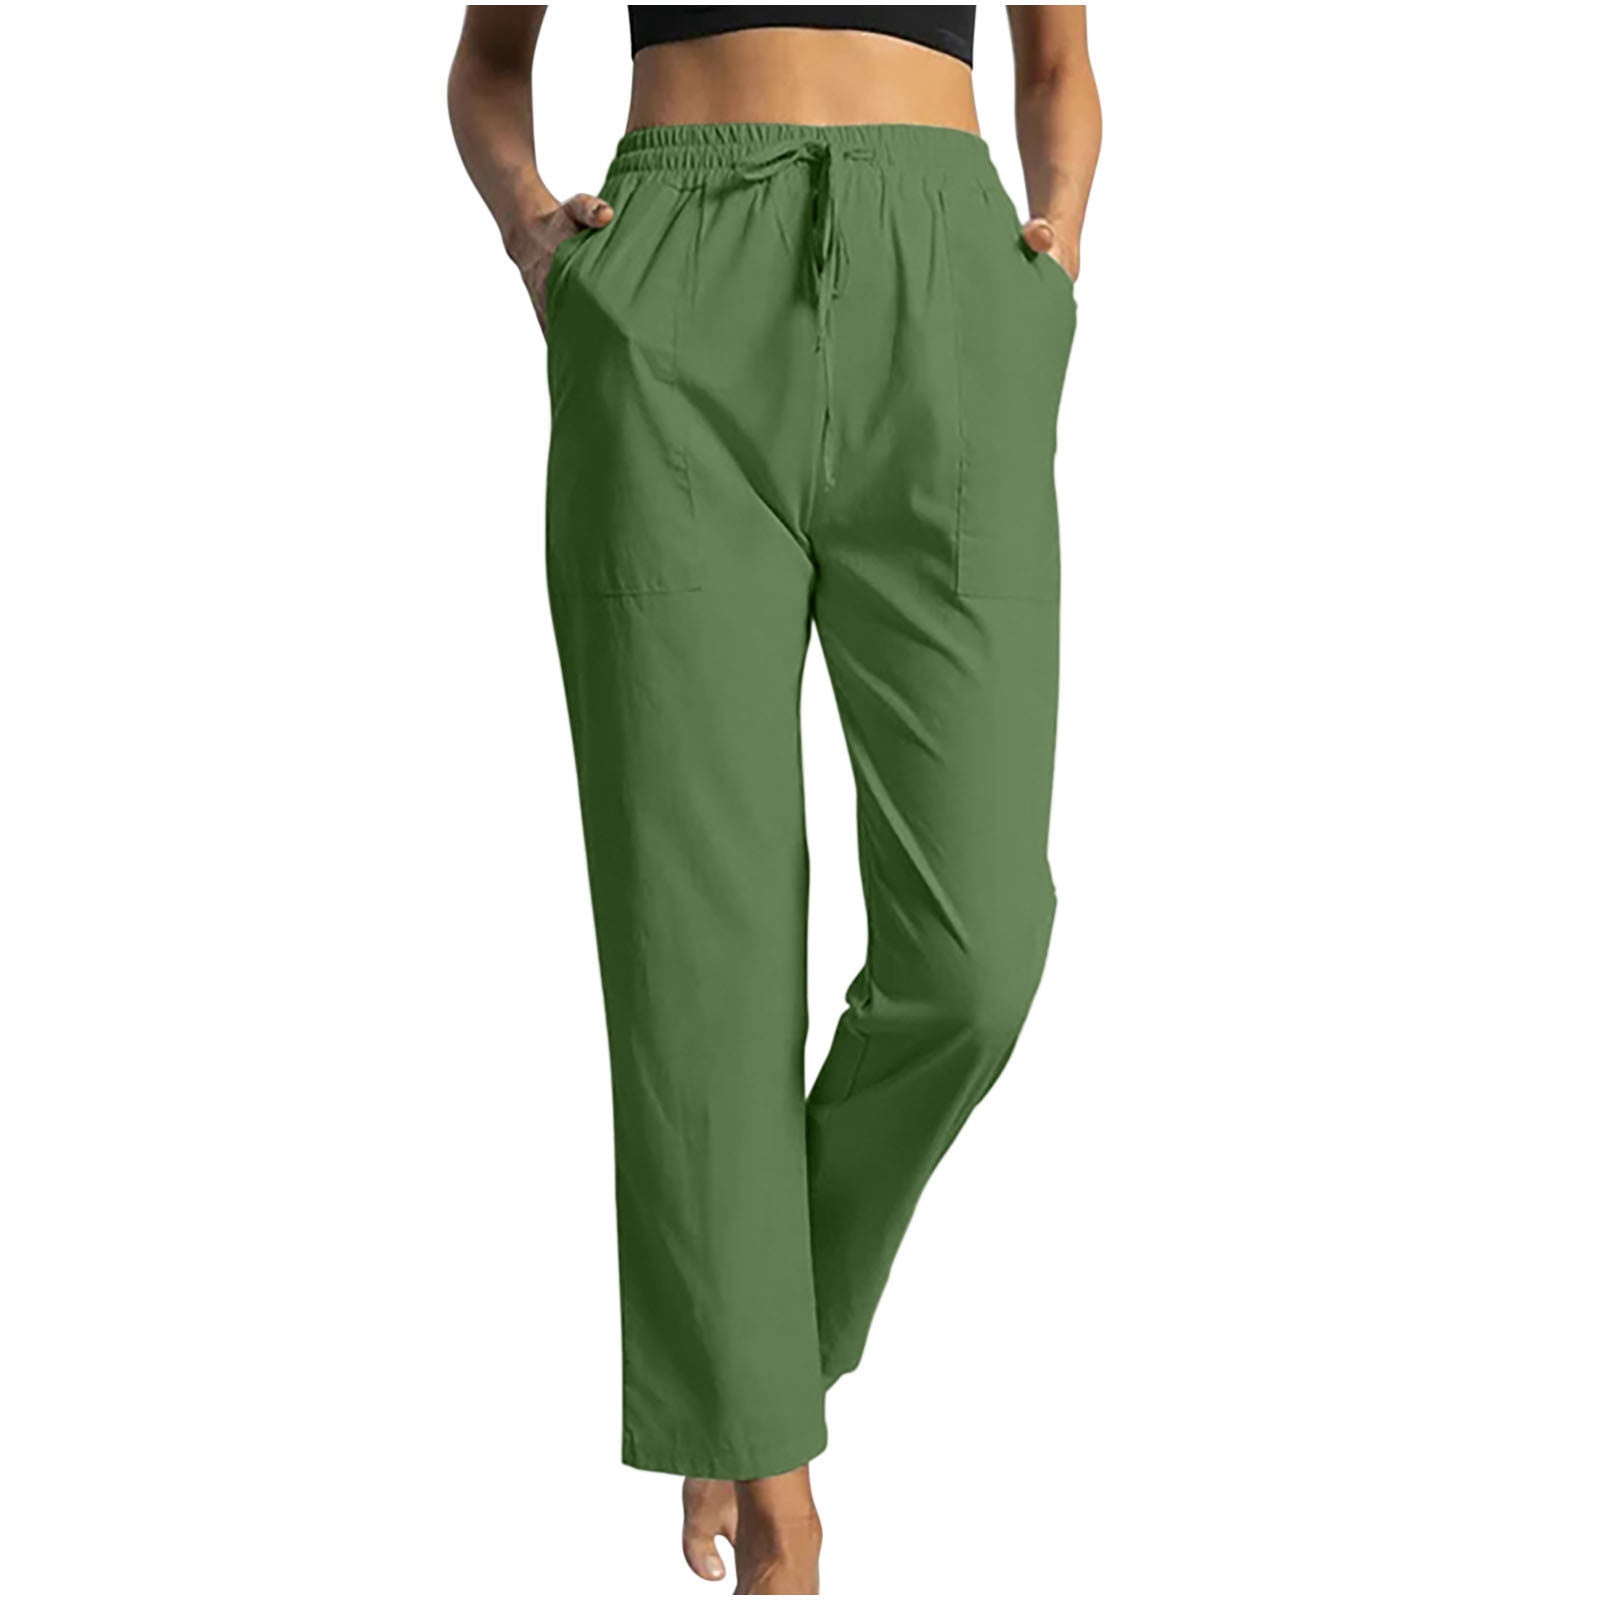 XFLWAM Women's Cotton Linen Pants Casual Drawstring Loose Elastic Waist  Beach Pant Trousers with Pockets Army Green XL 